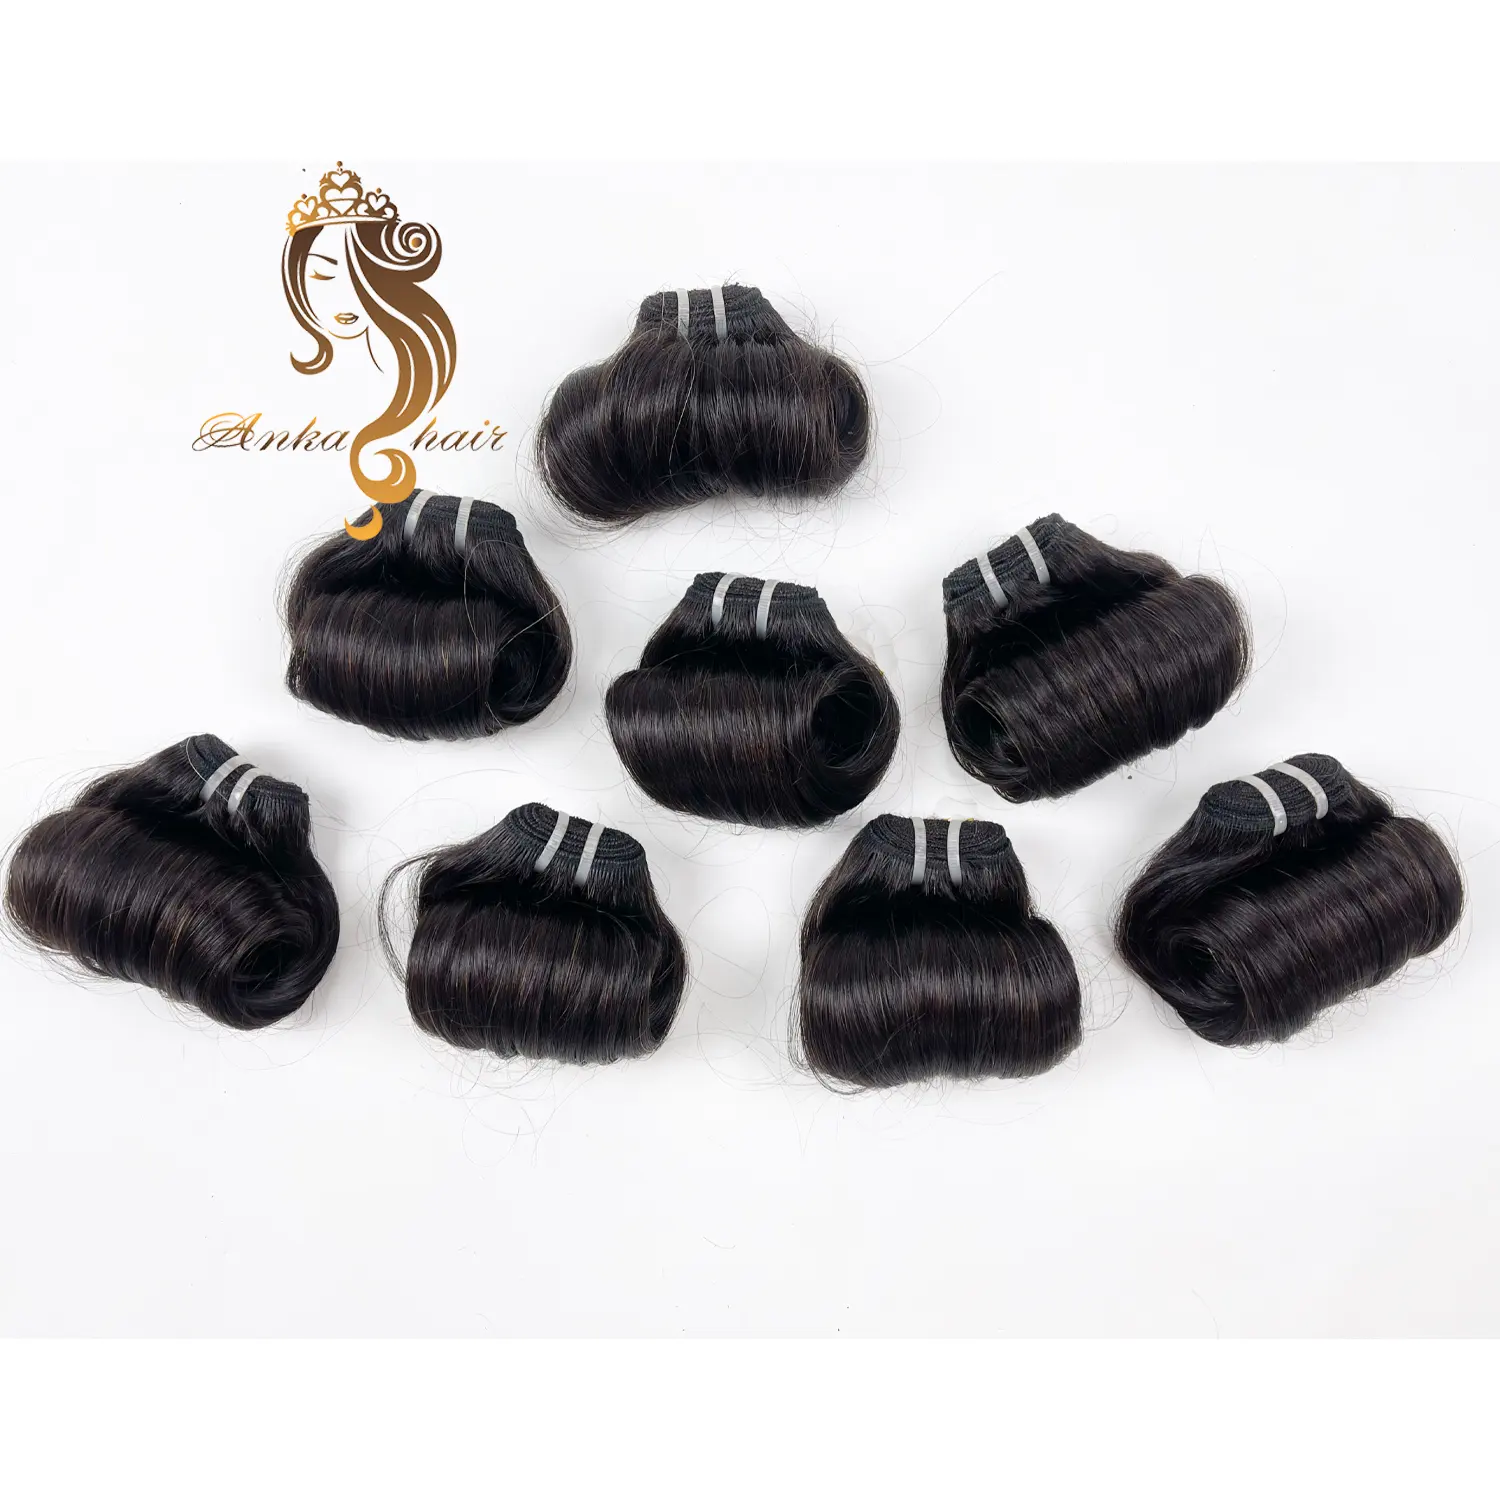 8-32 Inches Human Hair Extension Black Weft Hair - High Quality From Vietnam For Sale